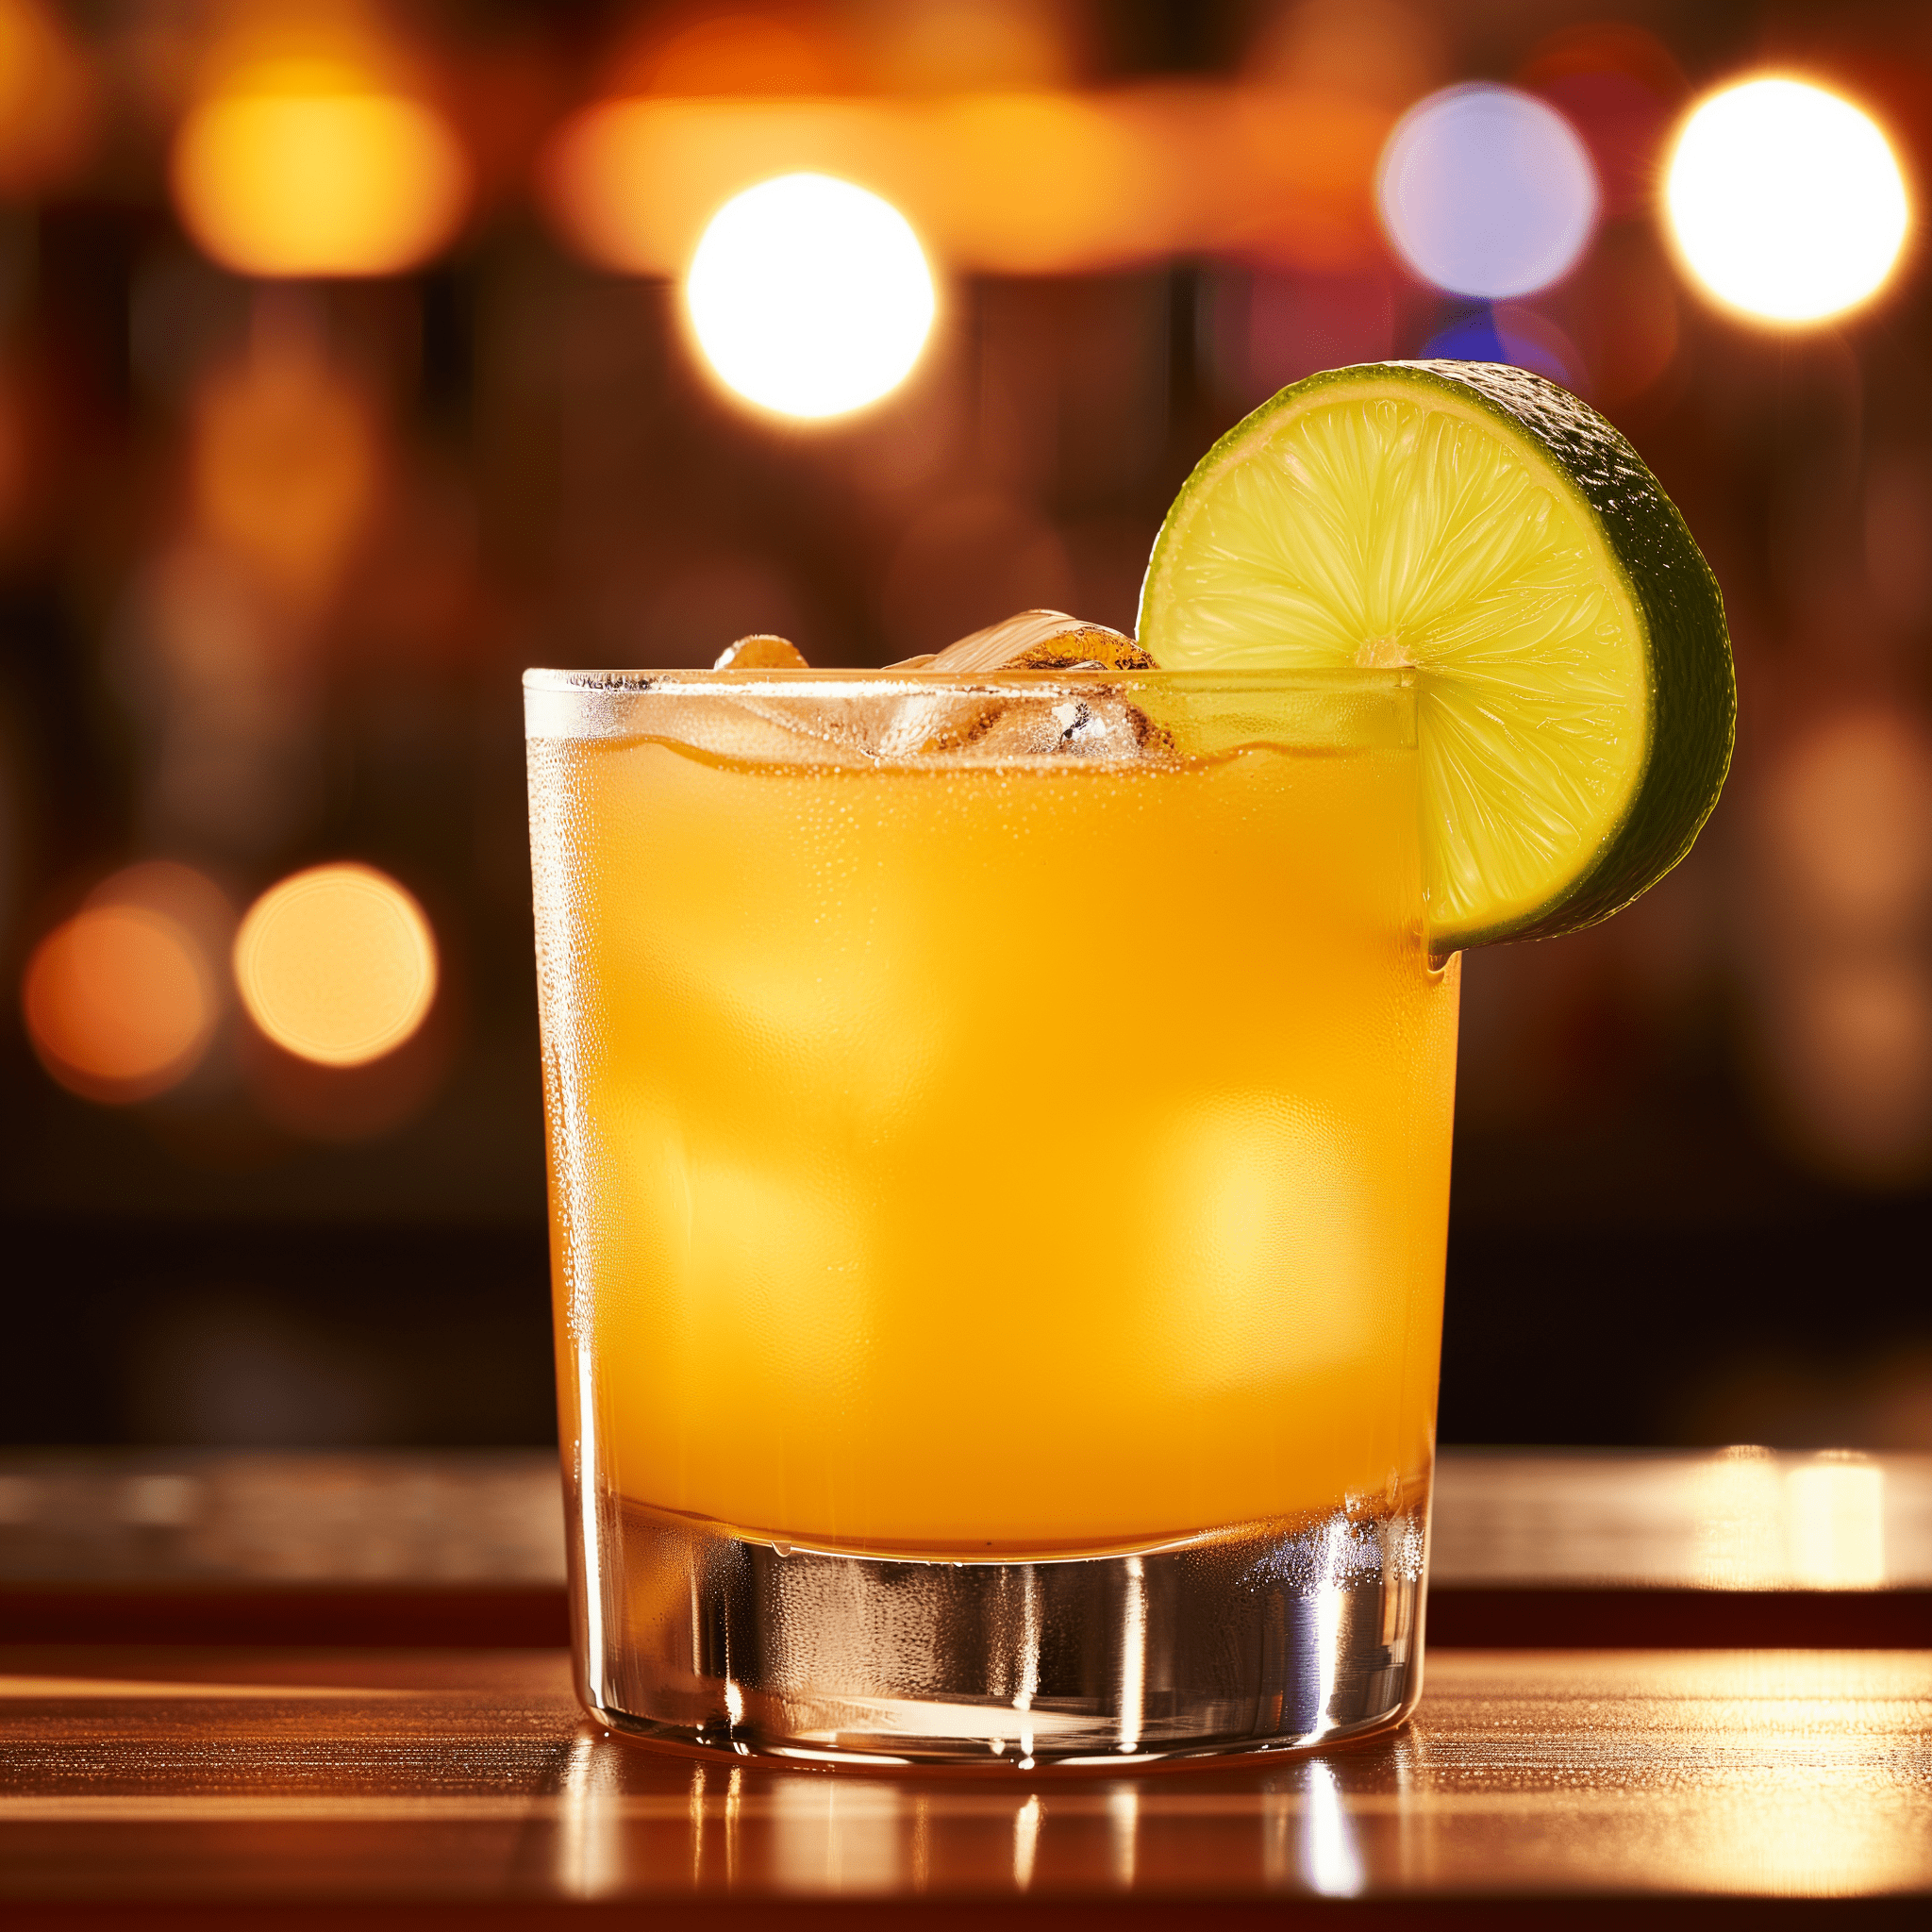 Gold Driver Cocktail Recipe - The Gold Driver offers a smooth, yet robust taste with a perfect blend of sweet and tangy. The tequila provides a warm, oaky undertone, while the fresh lime juice adds a zesty, slightly tart edge. The orange juice brings it all together with its natural sweetness and fruity notes, making for a refreshing and invigorating drink.